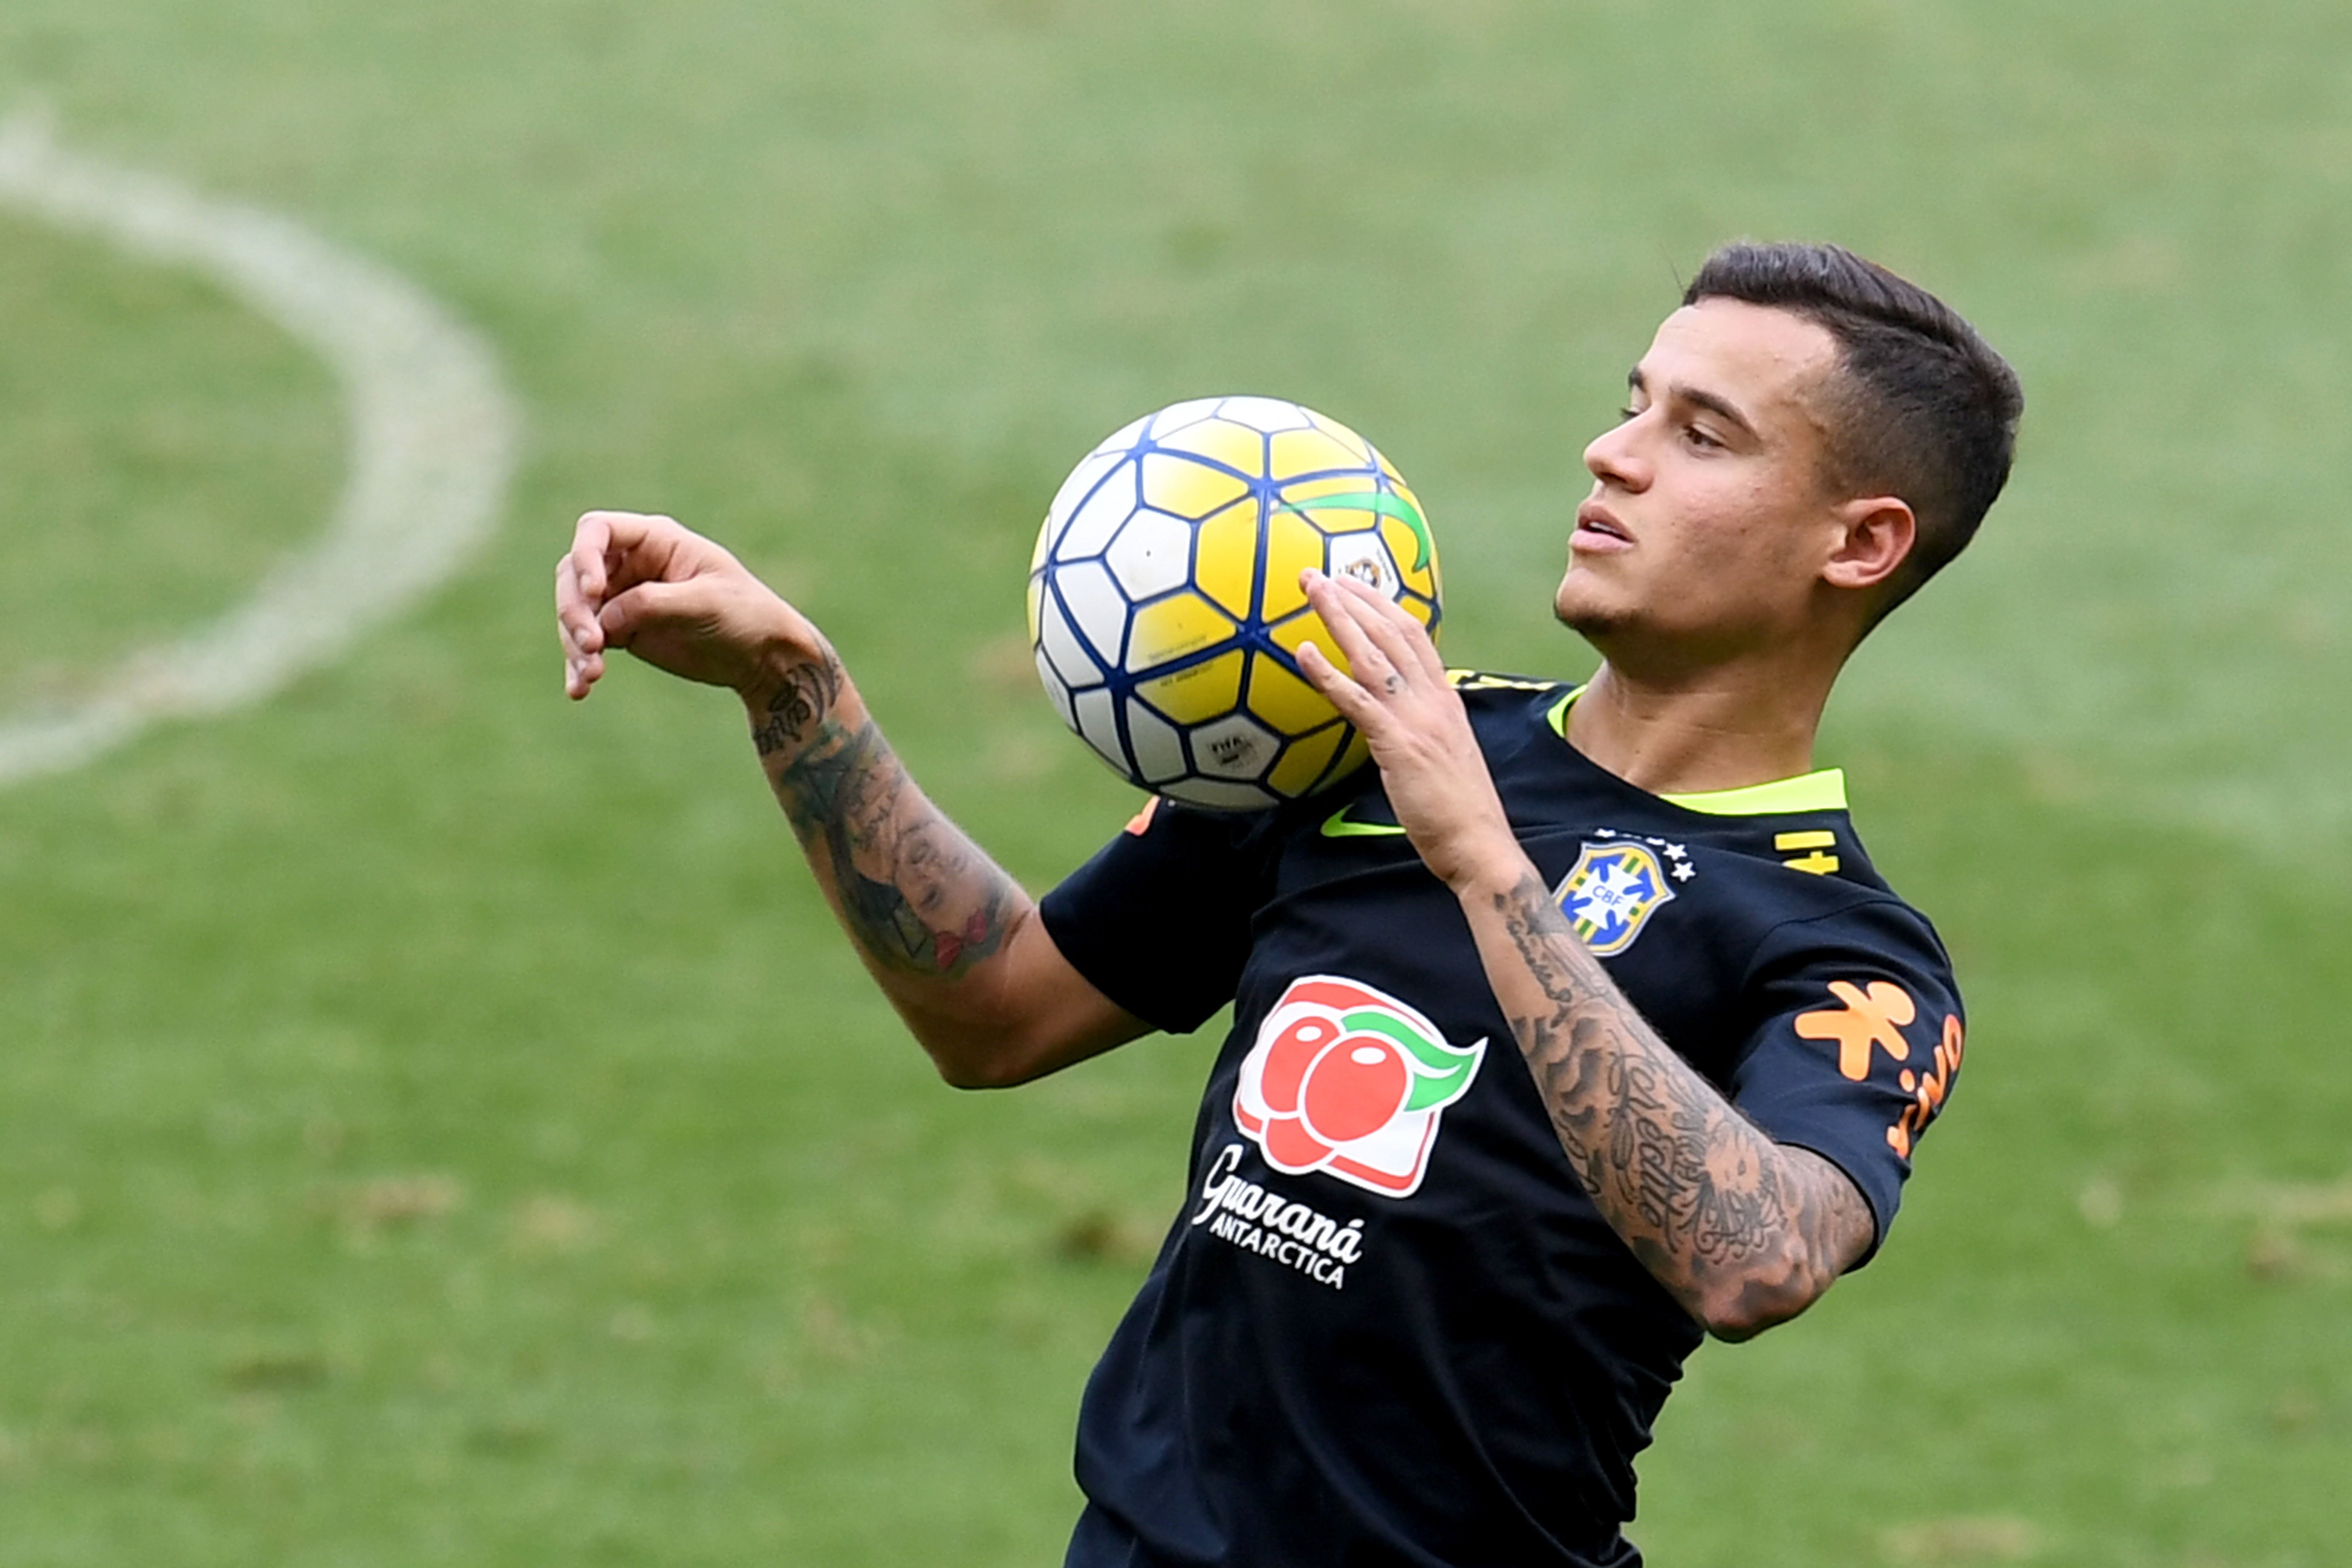 Philippe Coutinho In Training With Brazil - Coutinho Fond D Ecran Barça , HD Wallpaper & Backgrounds